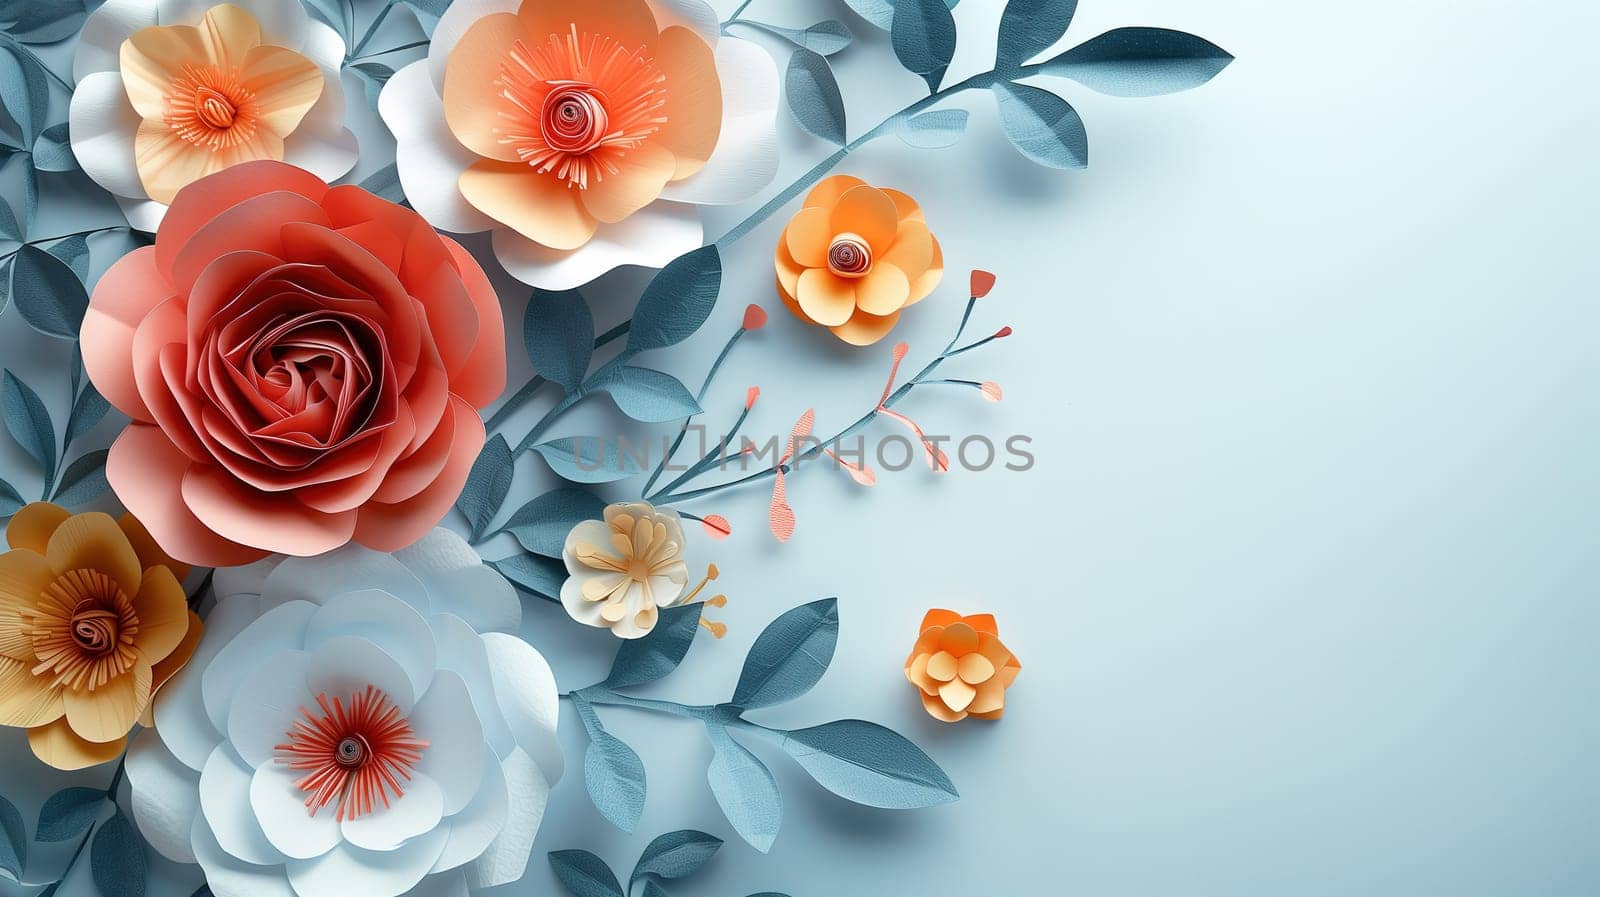 A collection of paper flowers of various colors and sizes arranged neatly on a vibrant blue background. The flowers are intricately crafted and create a visually appealing display.